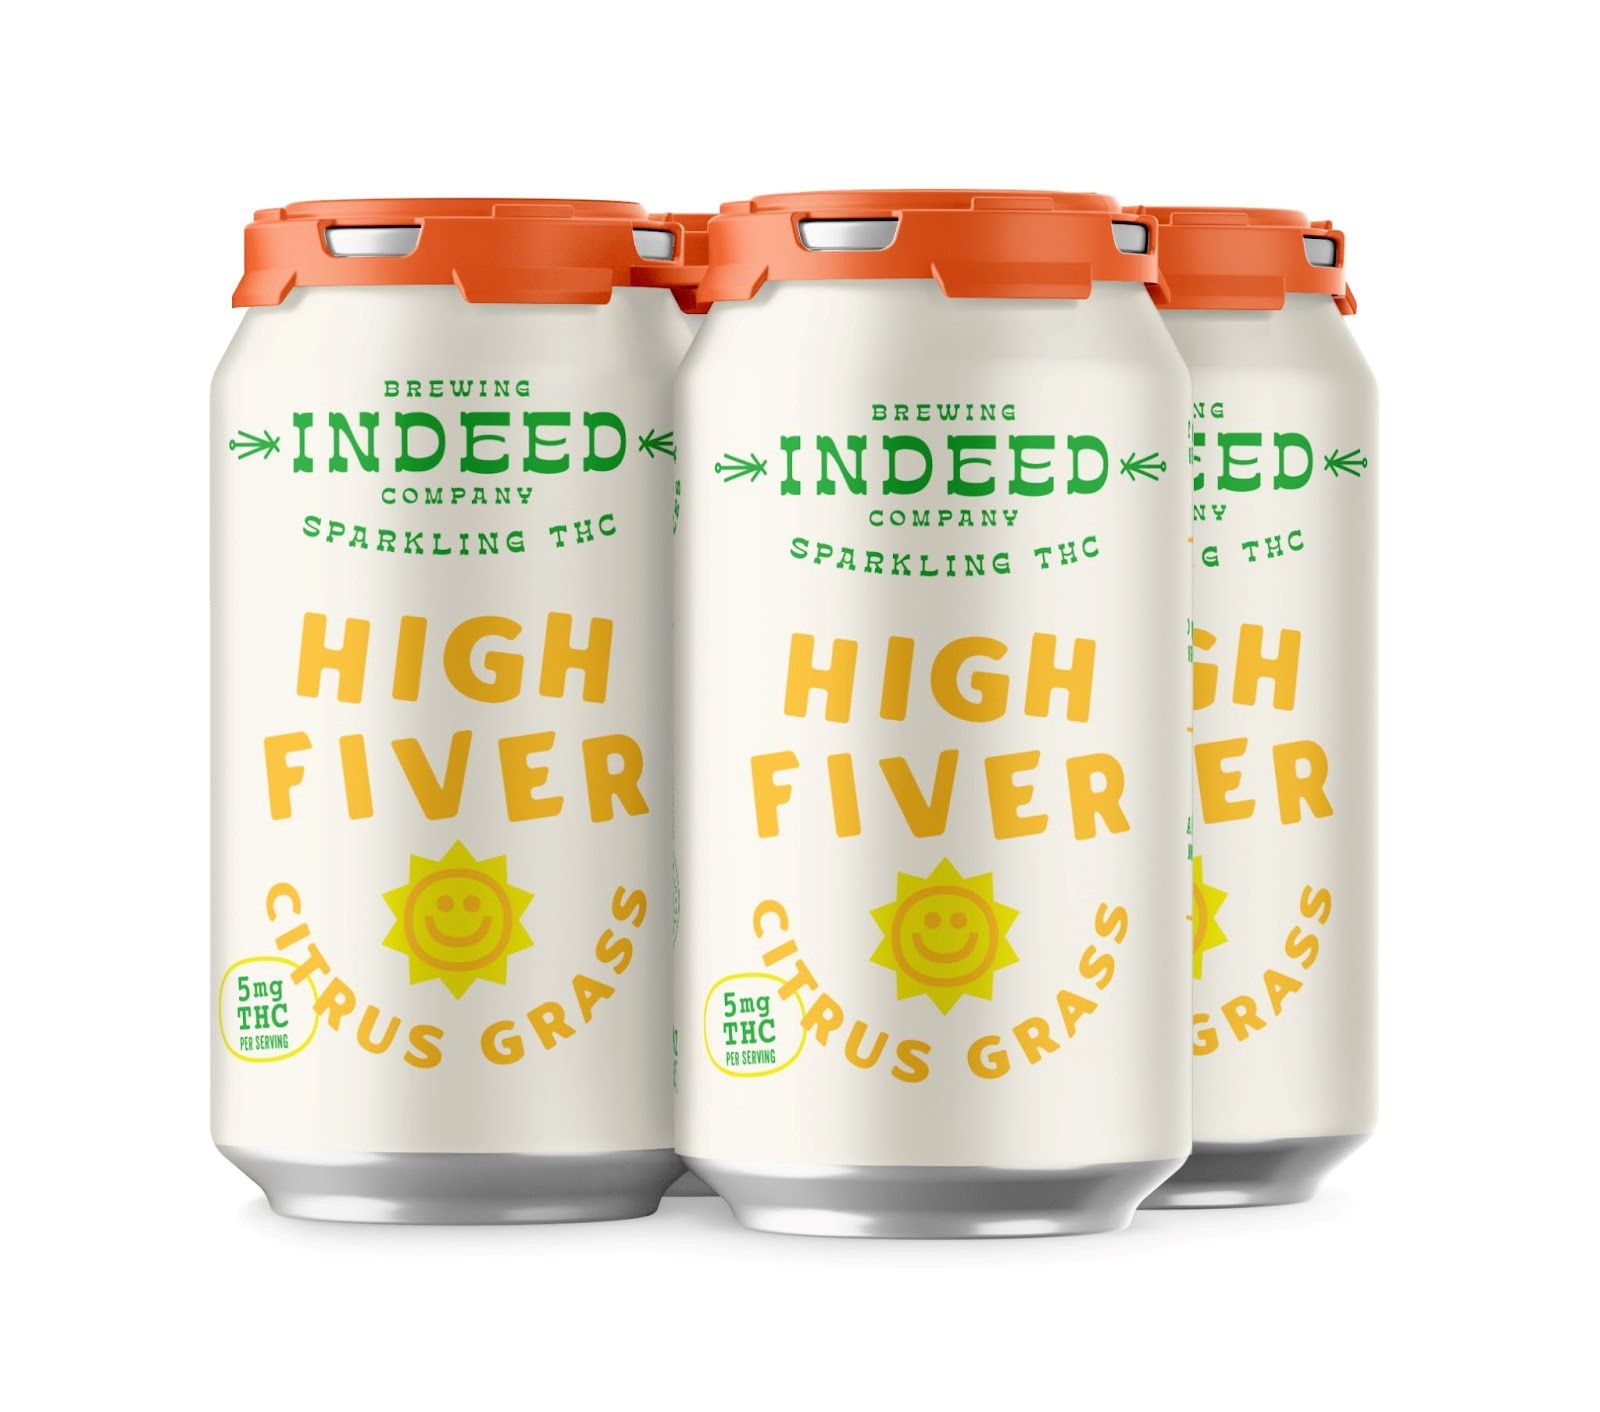 Indeed Brewing Company Sparkling THC - High Fiver Citrus Grass